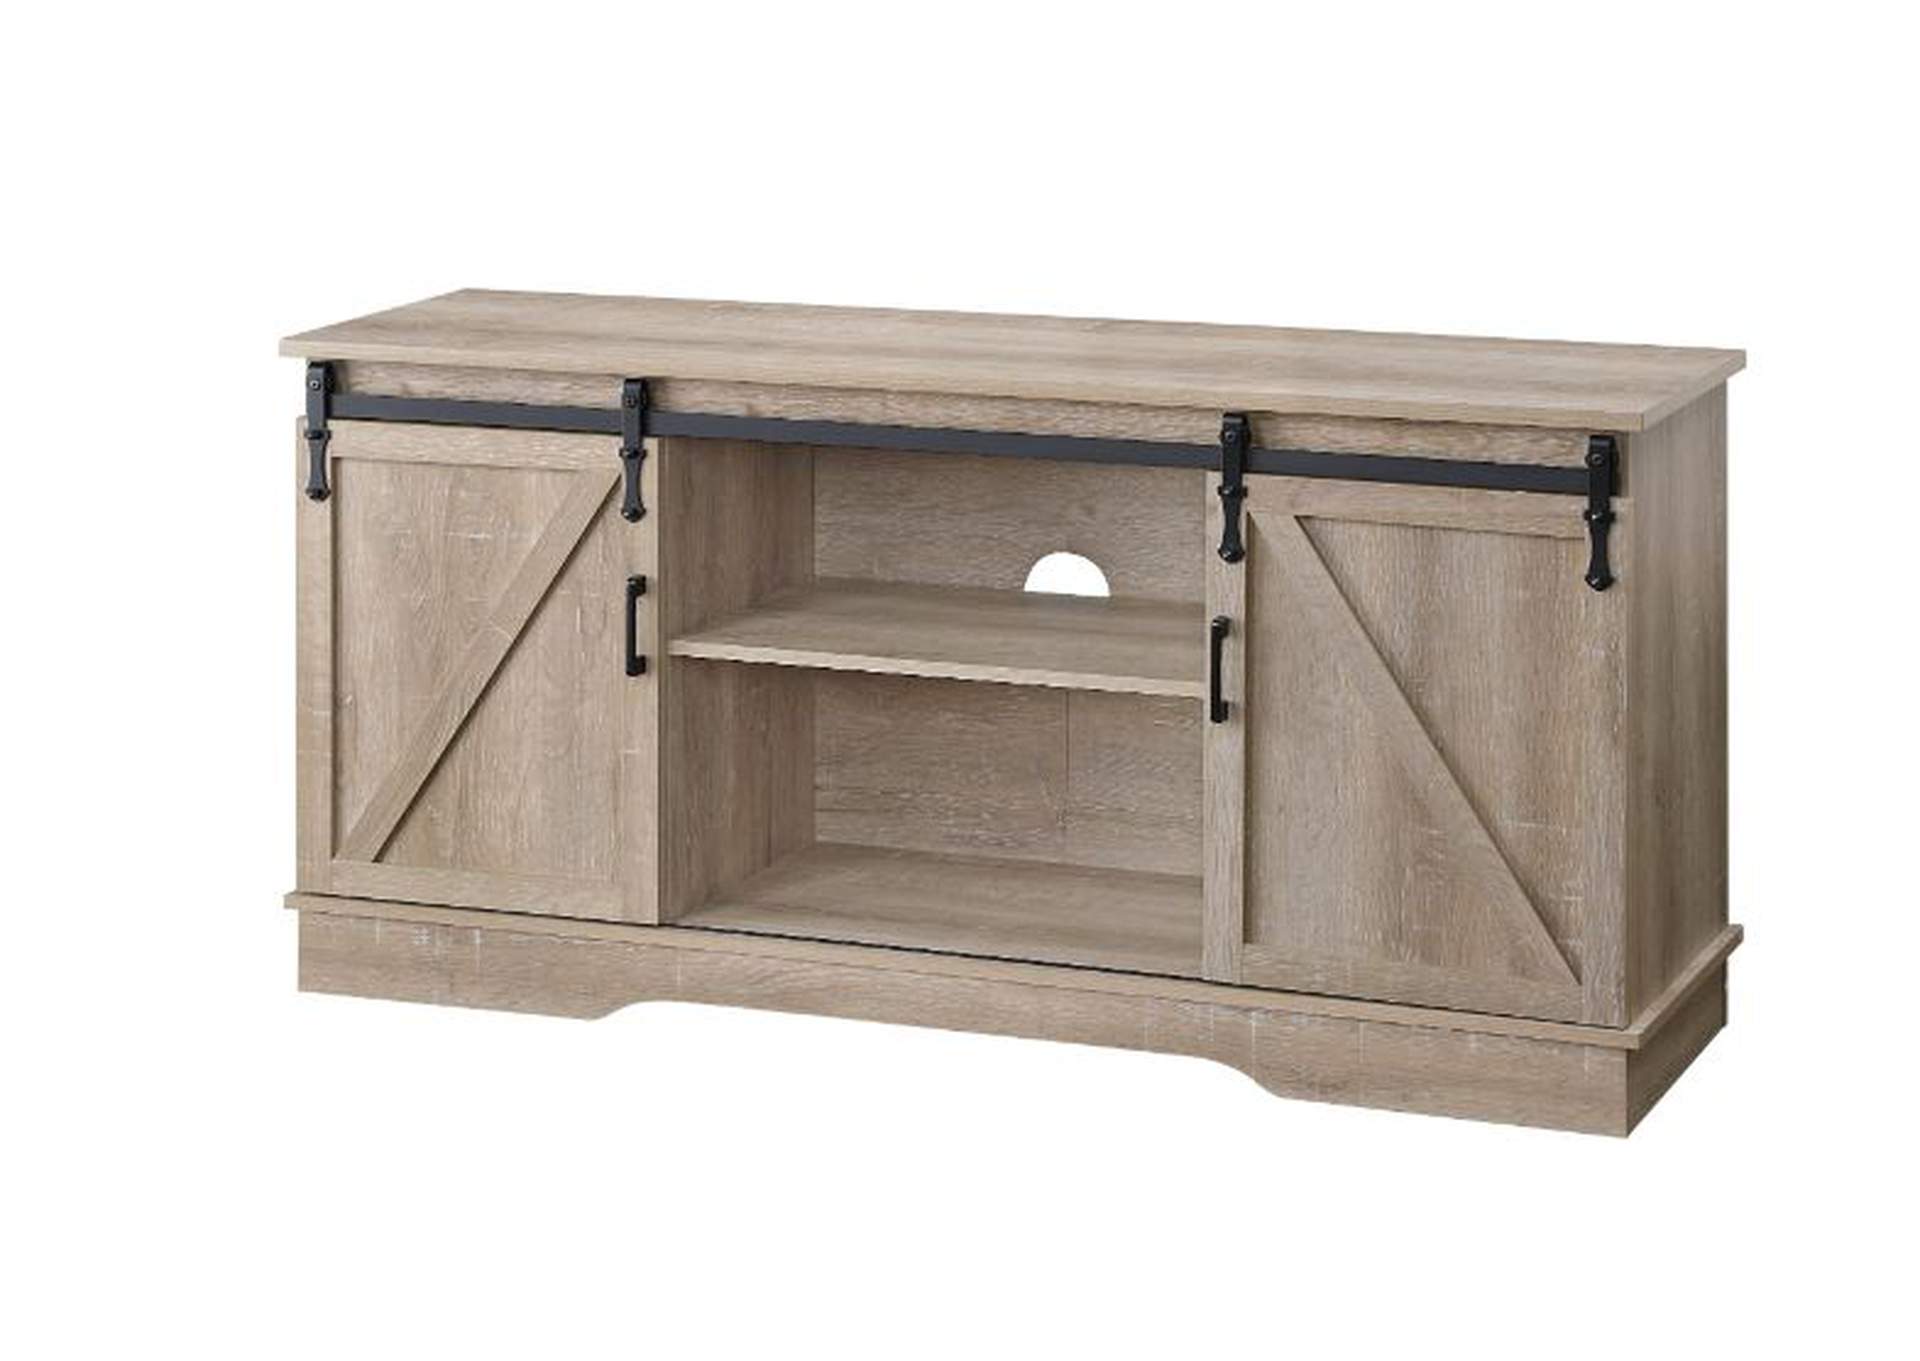 Bennet Tv Stand,Acme